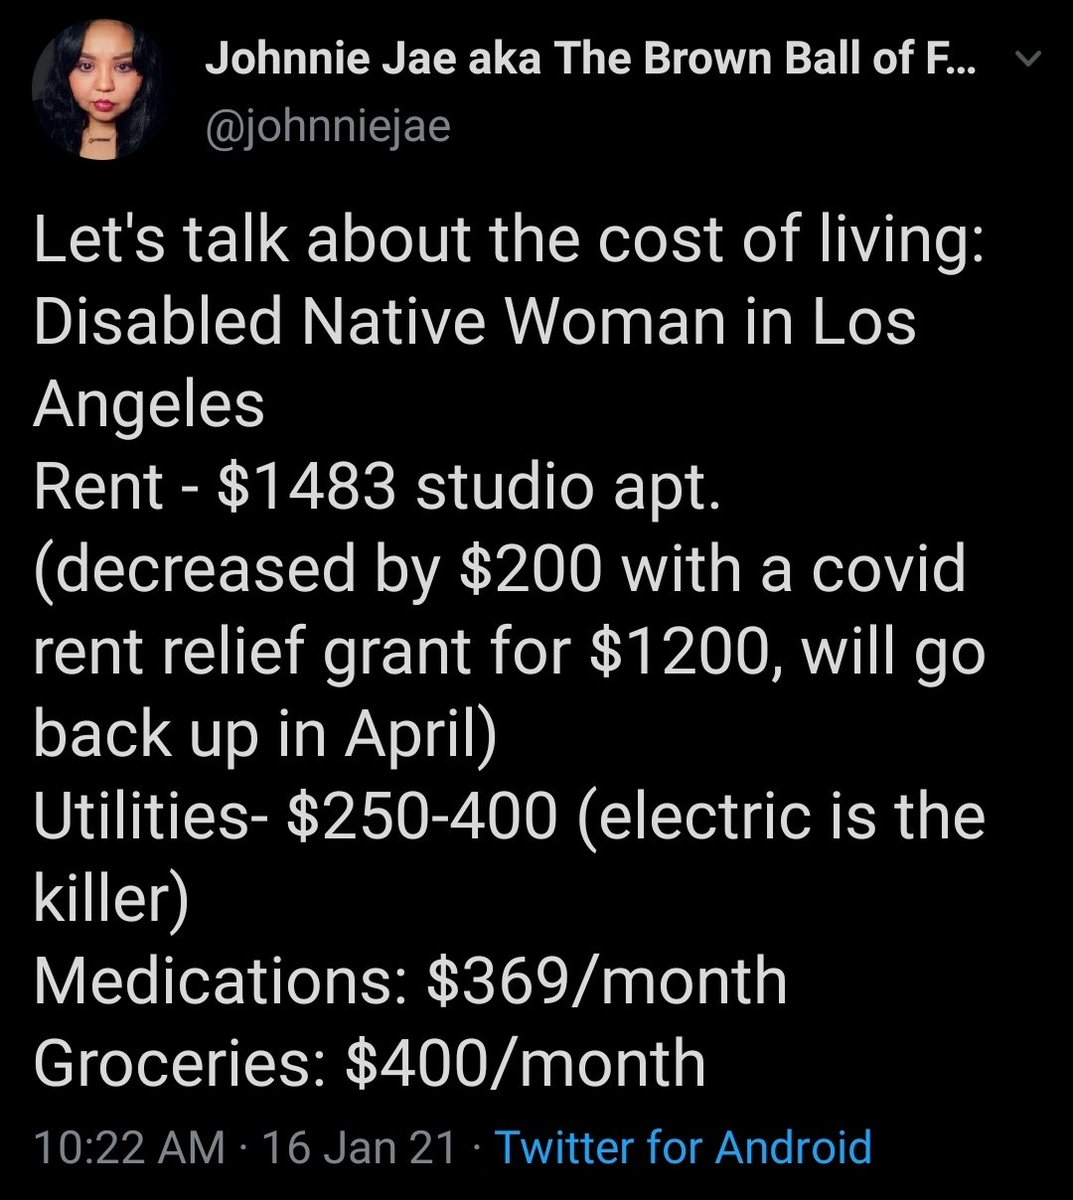 Living here in LA, here's just an overview of my monthly cost of living and as you can tell $1650 doesn't cover all my expenses, but I also take on freelance graphic and writing jobs, my partner was doing mobile bike maintenance but it just got too risk as Covid surged here.